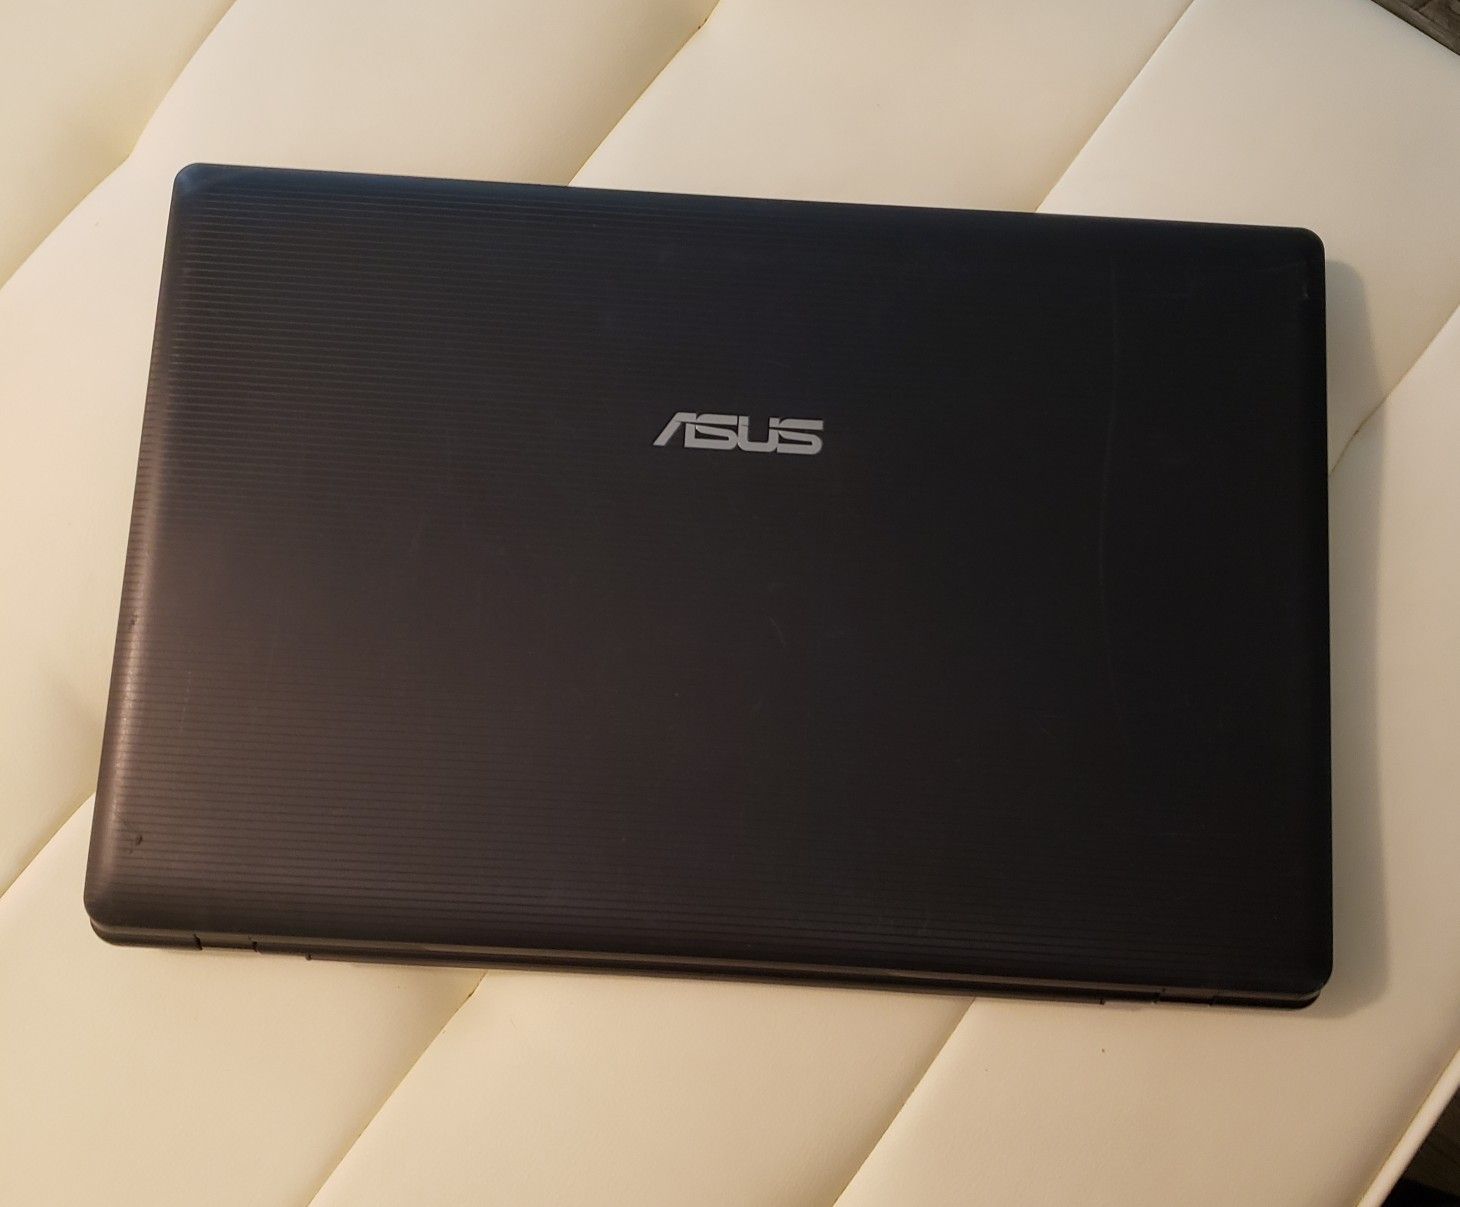 Laptop Asus Core I5 2.6GHz 500GB HDD 4GB Ram